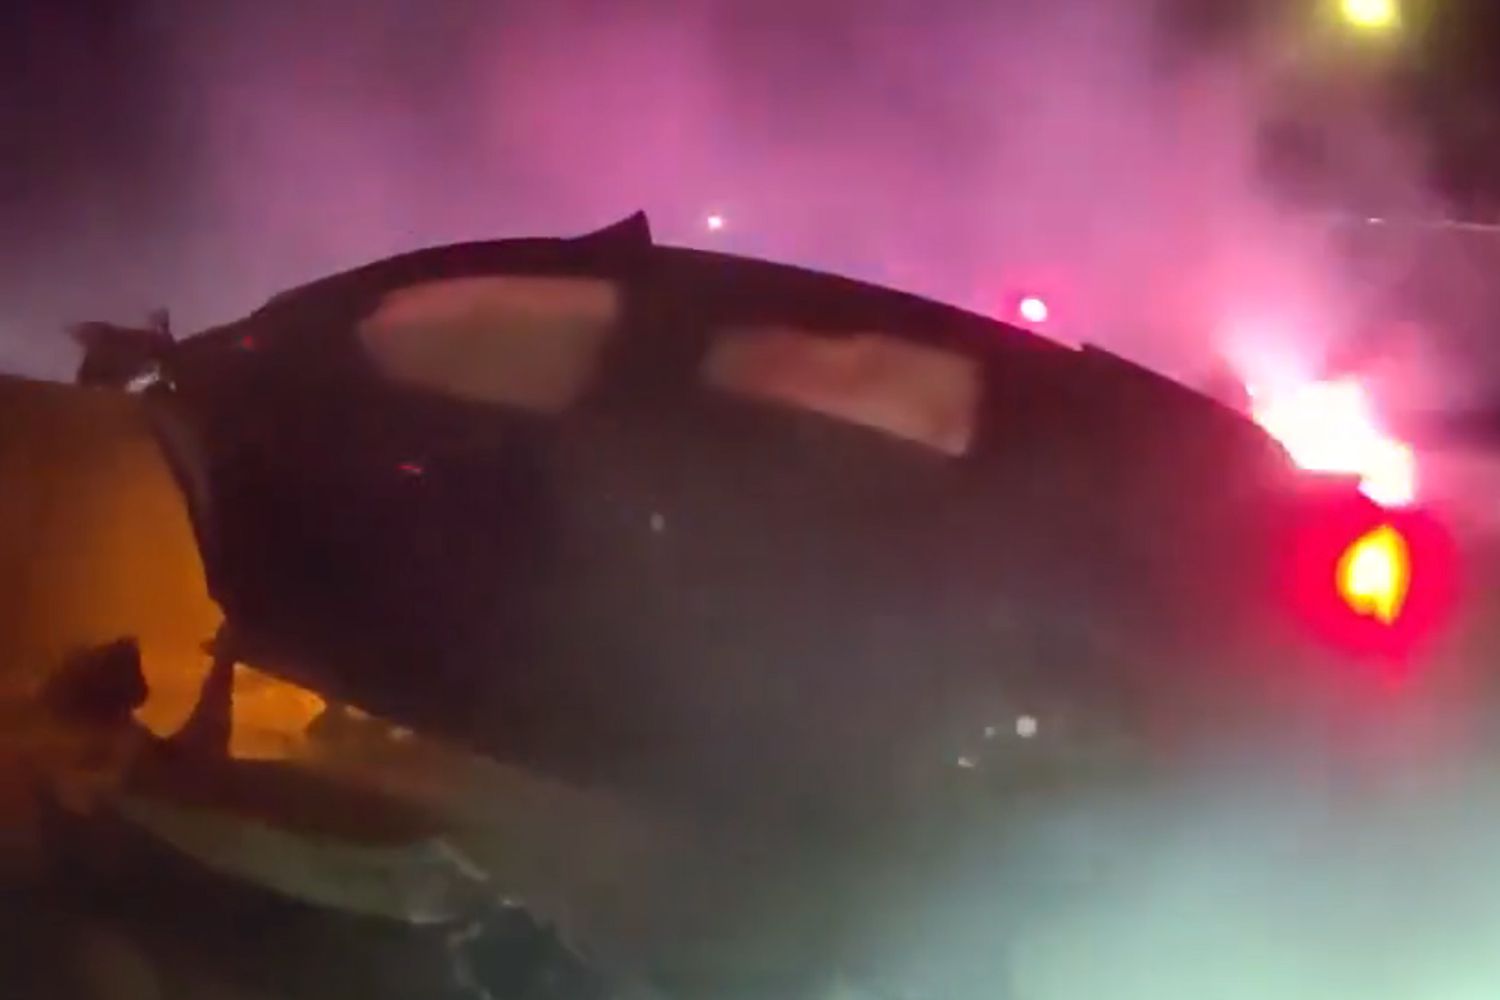 Texas Police Officer Rescues Man from Burning Car [Video]